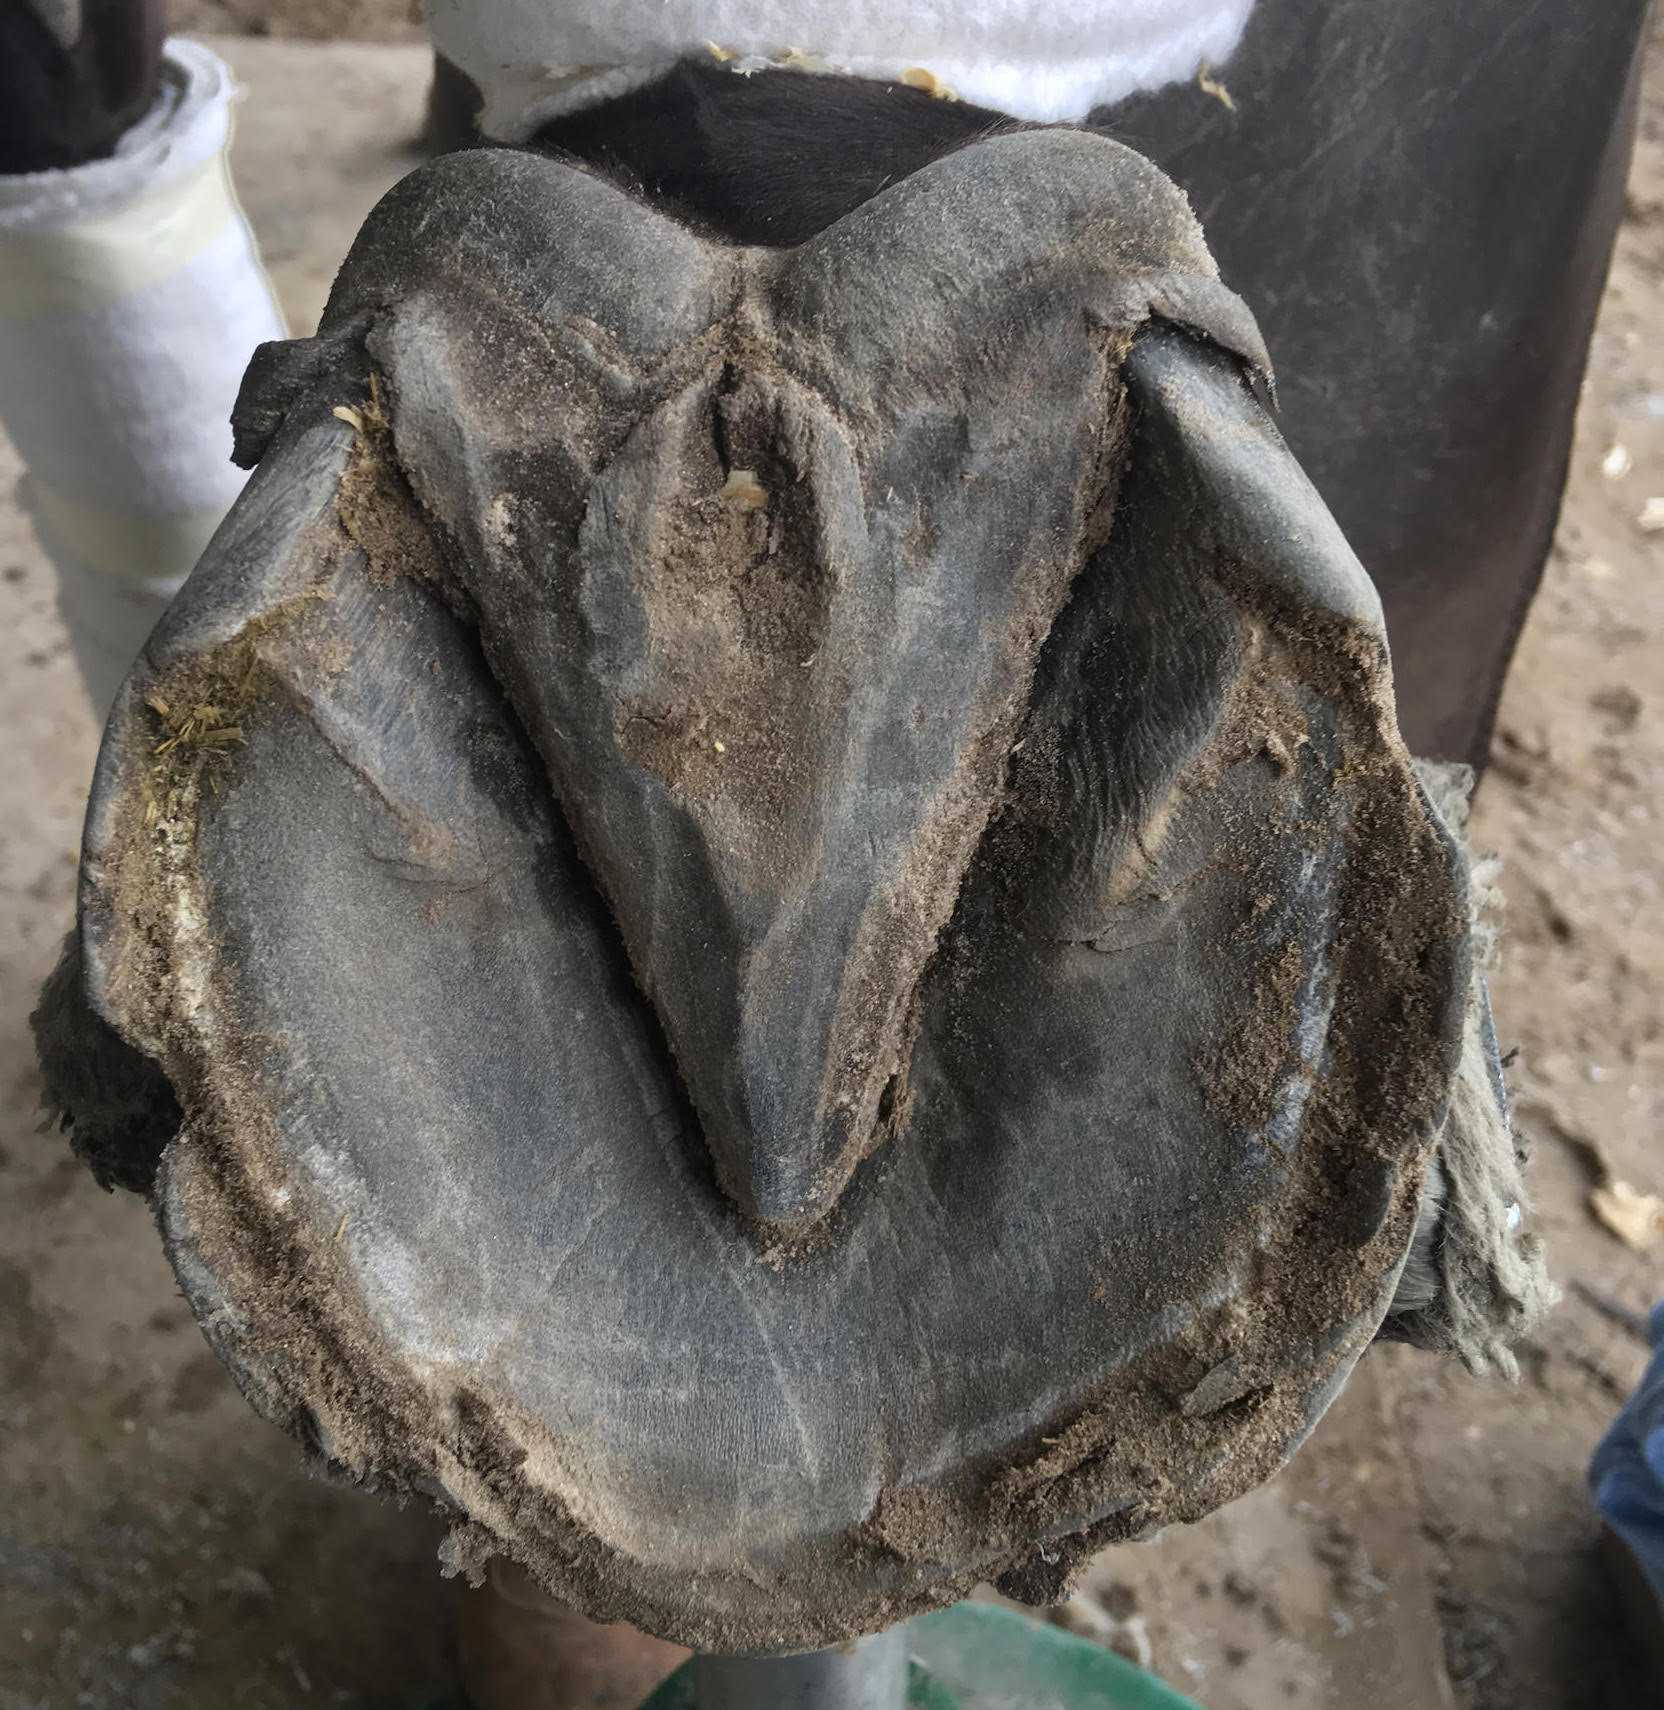 The underside of a hoof. The horse has built a natural shoe ‘edge’ around the unshod foot